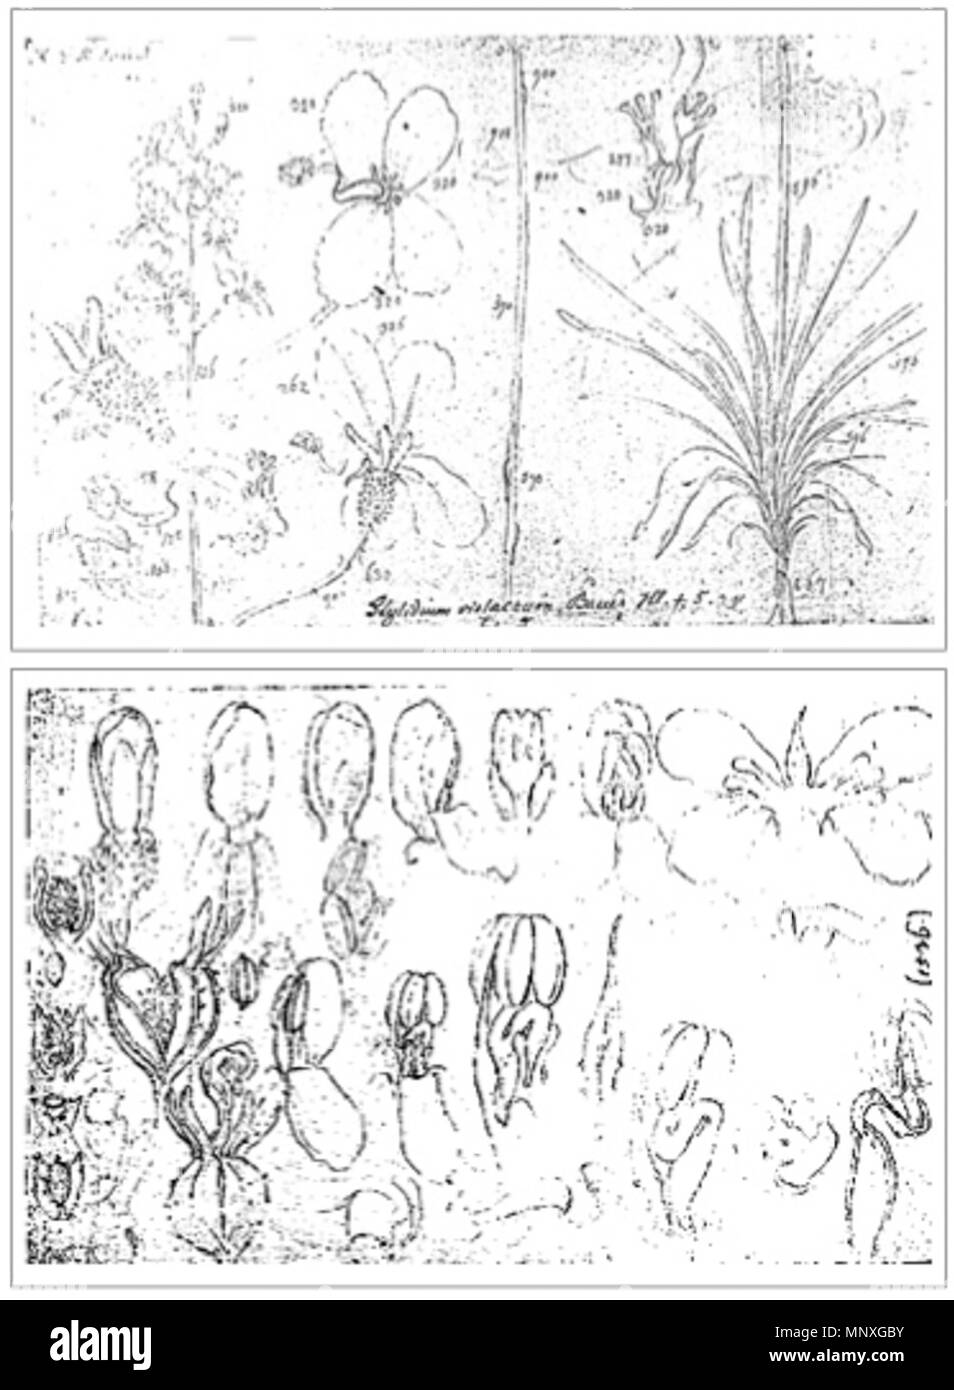 . This low resolution reproduction is of two sketches made by Ferdinand Bauer, , Stylidium violaceum, when they where brought on board the Investigator at King George Sound and Lucky Bay. These colour coded drawings were the reference for Plate 5 in his Illustrationes Florae Novae Hollandiae. between 1801 and 1802. Ferdinand Bauer 1149 Stylidium violaceum - Bauer sketches Stock Photo